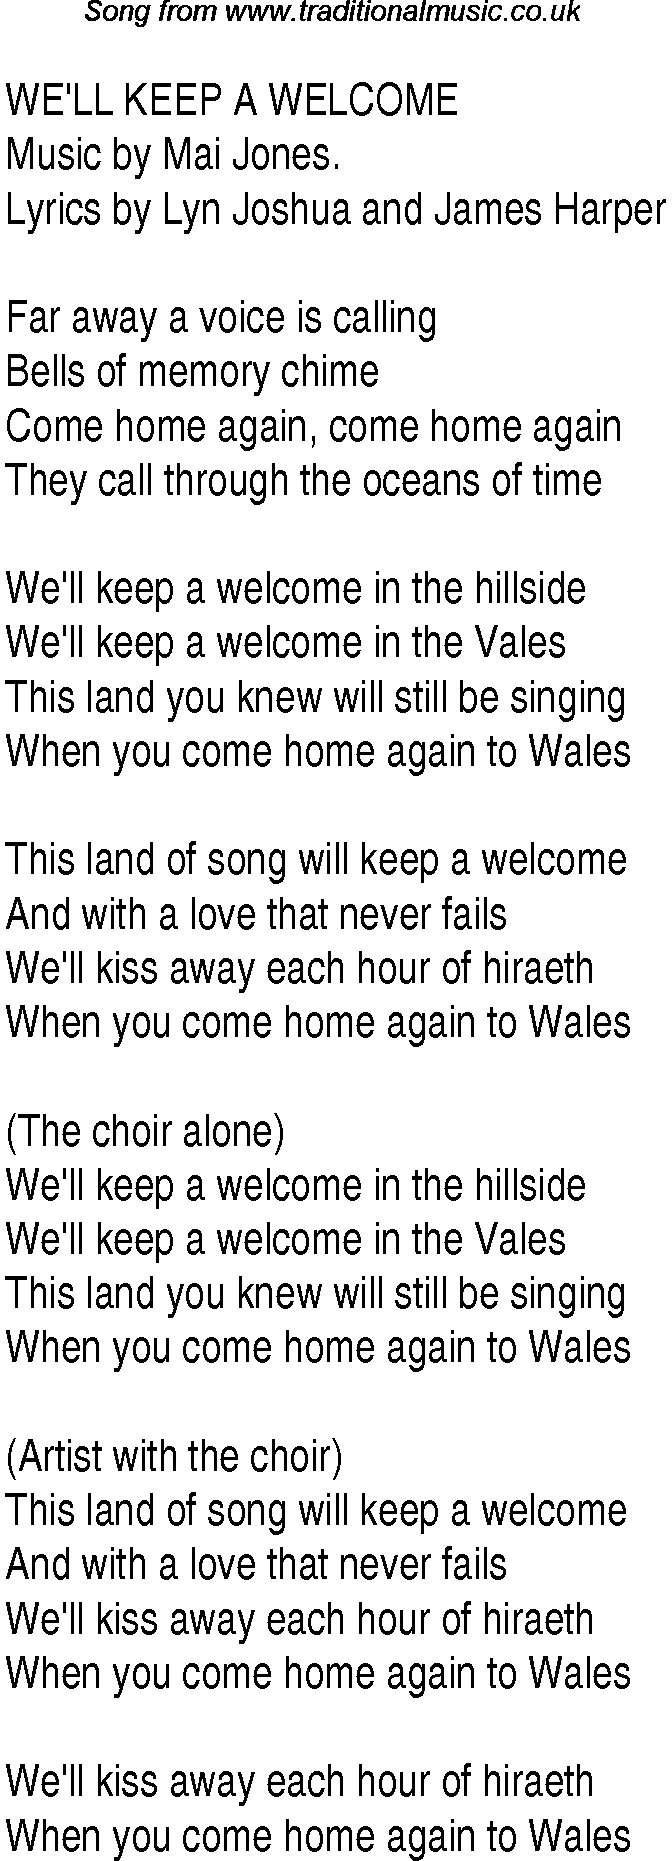 1940s top songs - lyrics for We'll Keep A Welcome